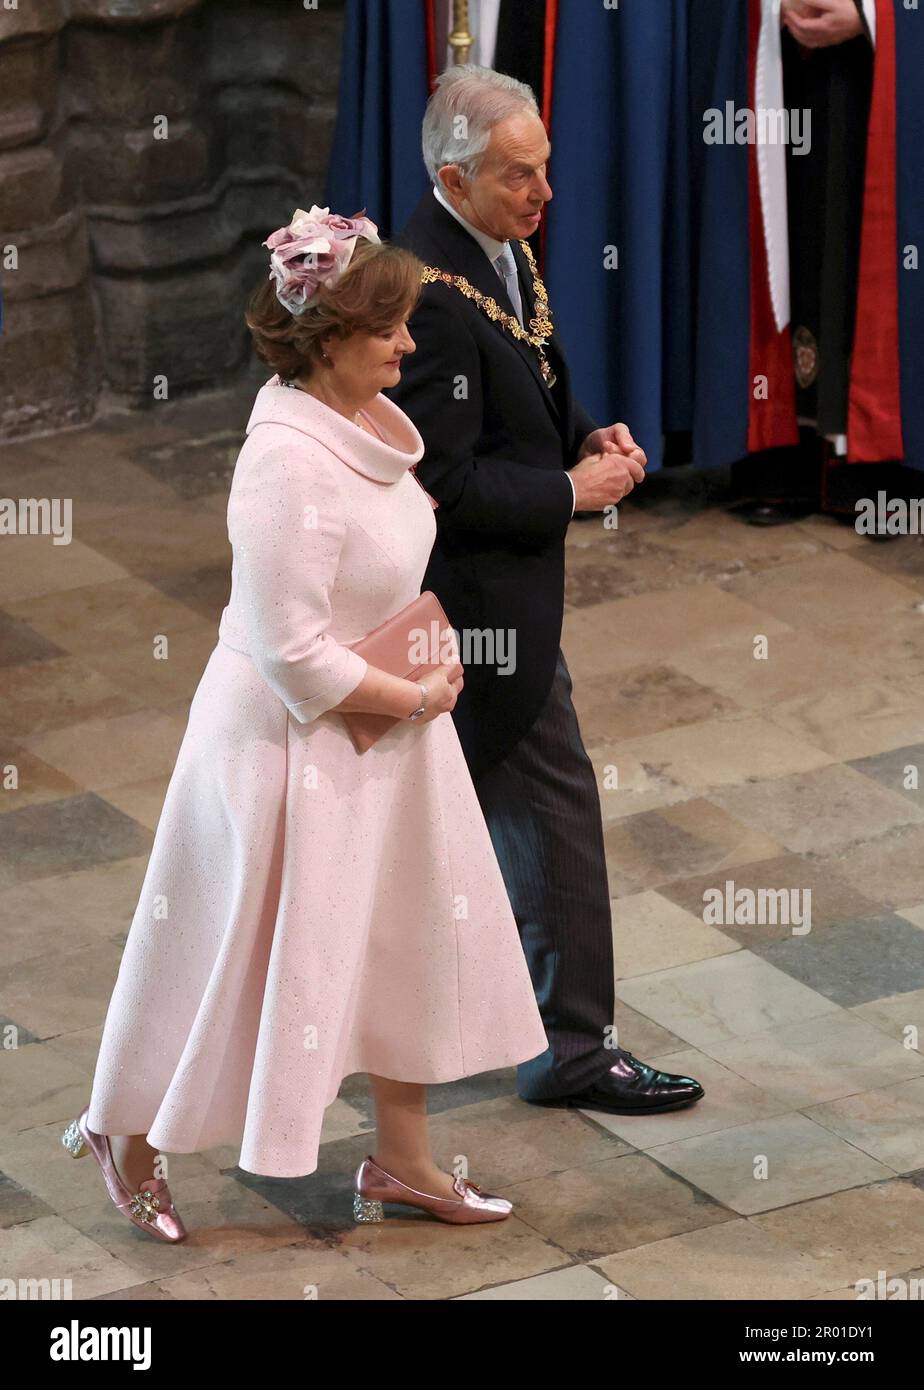 Former Prime Minister Tony Blair and his wife Cherie Blair arrive to attend Britain's King Charles III and Queen Consort Camilla's coronation ceremony, at Westminster Abbey, in London, Saturday, May 6, 2023. (Phil Noble/Pool Photo via AP) Stock Photo